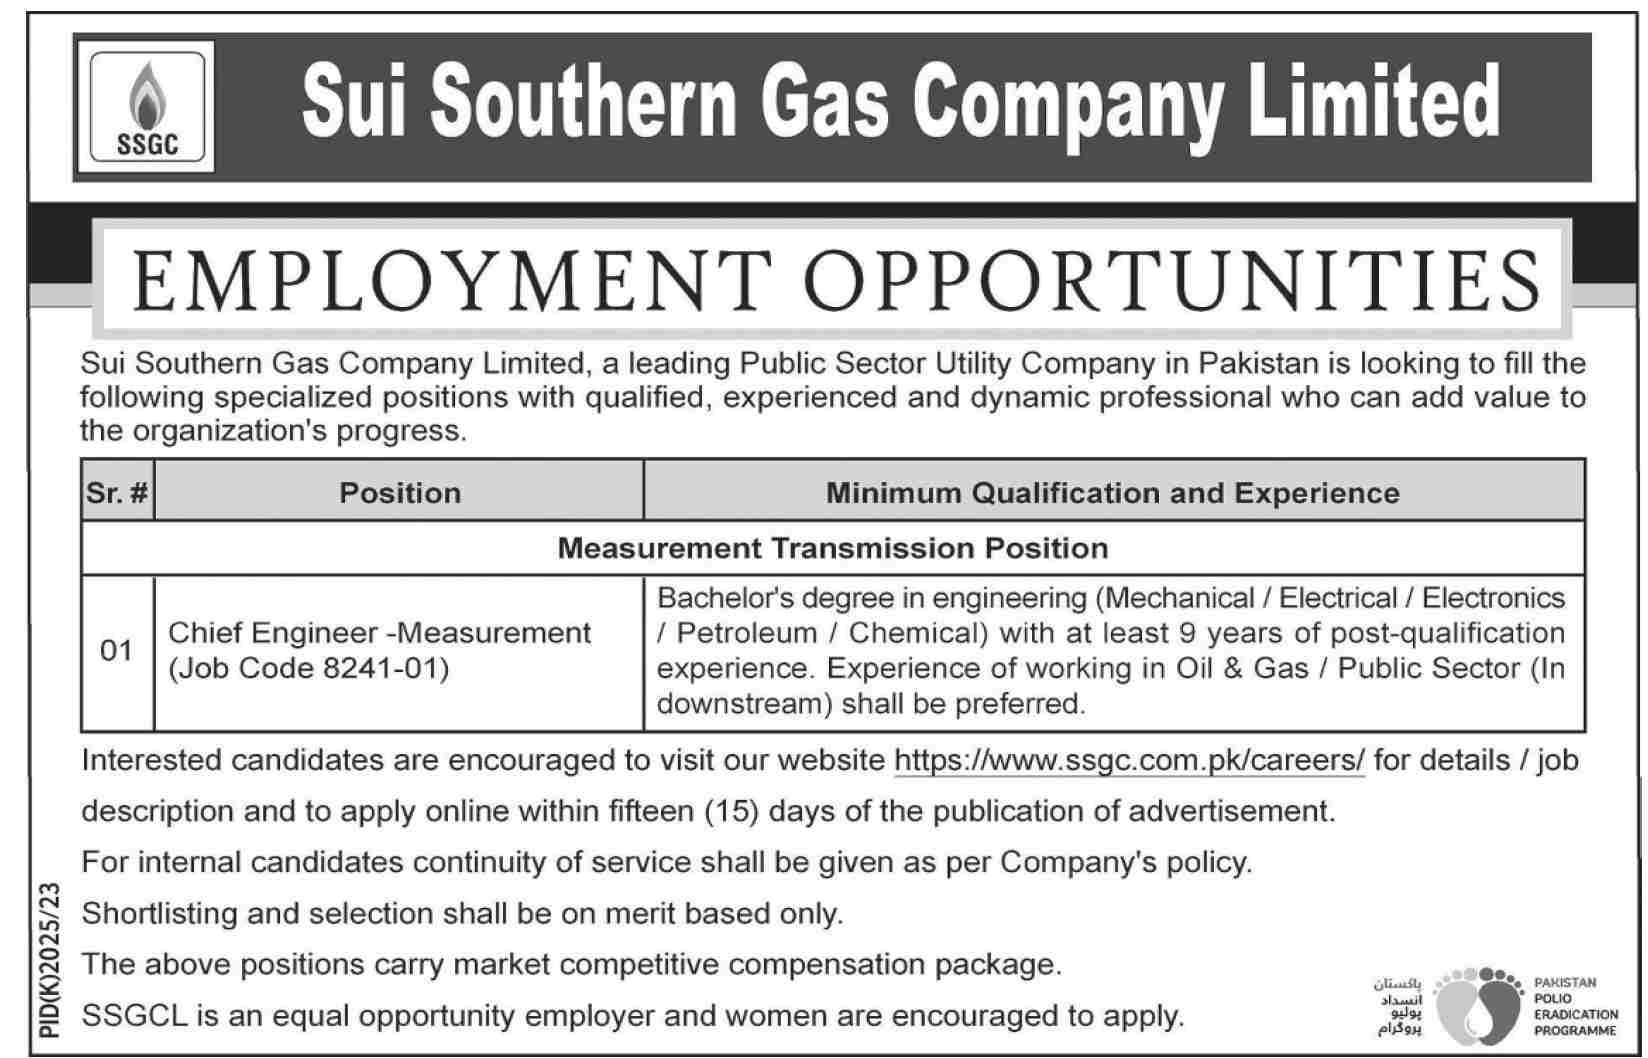 Sui Southern Gas Company Limited Engineering Employment Opportunities